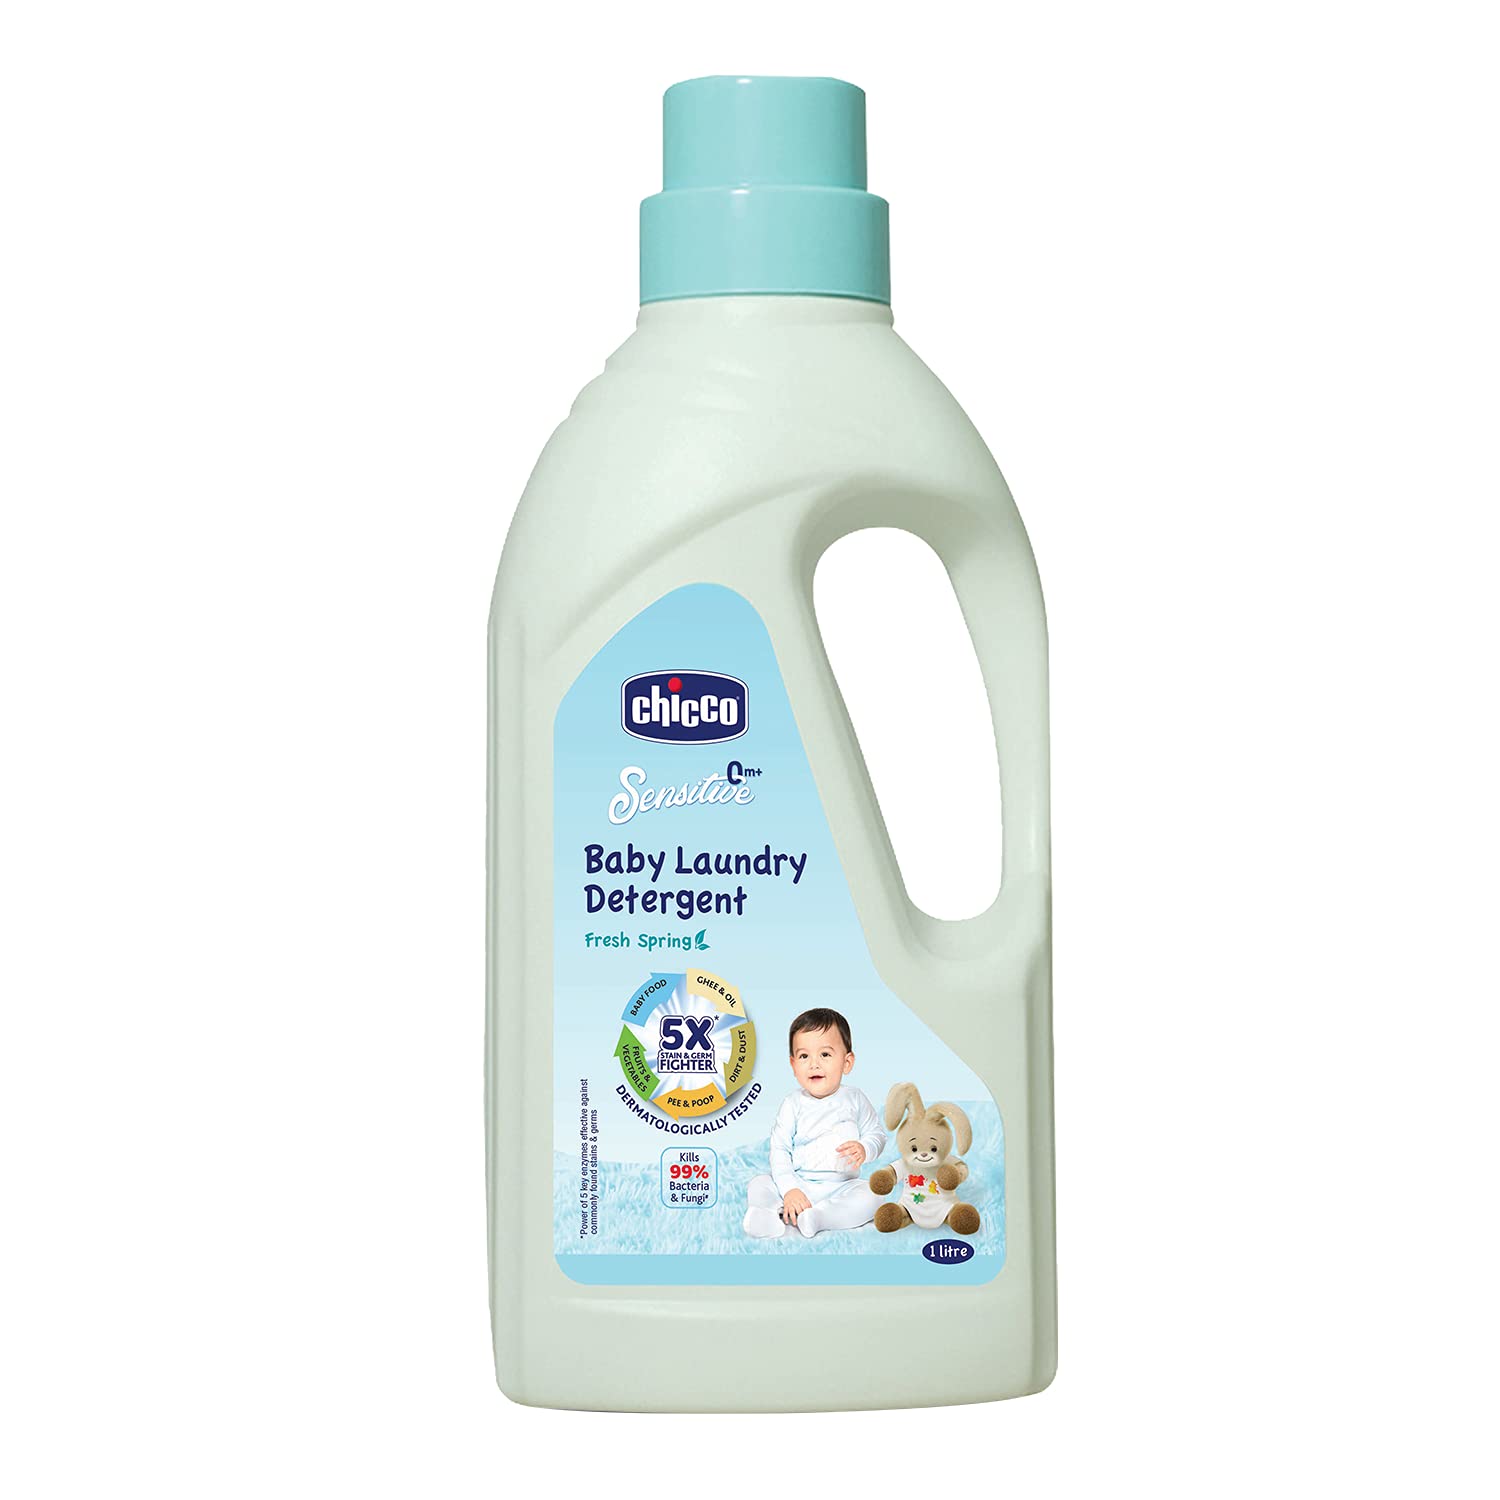 Chicco Baby Laundry Detergent,